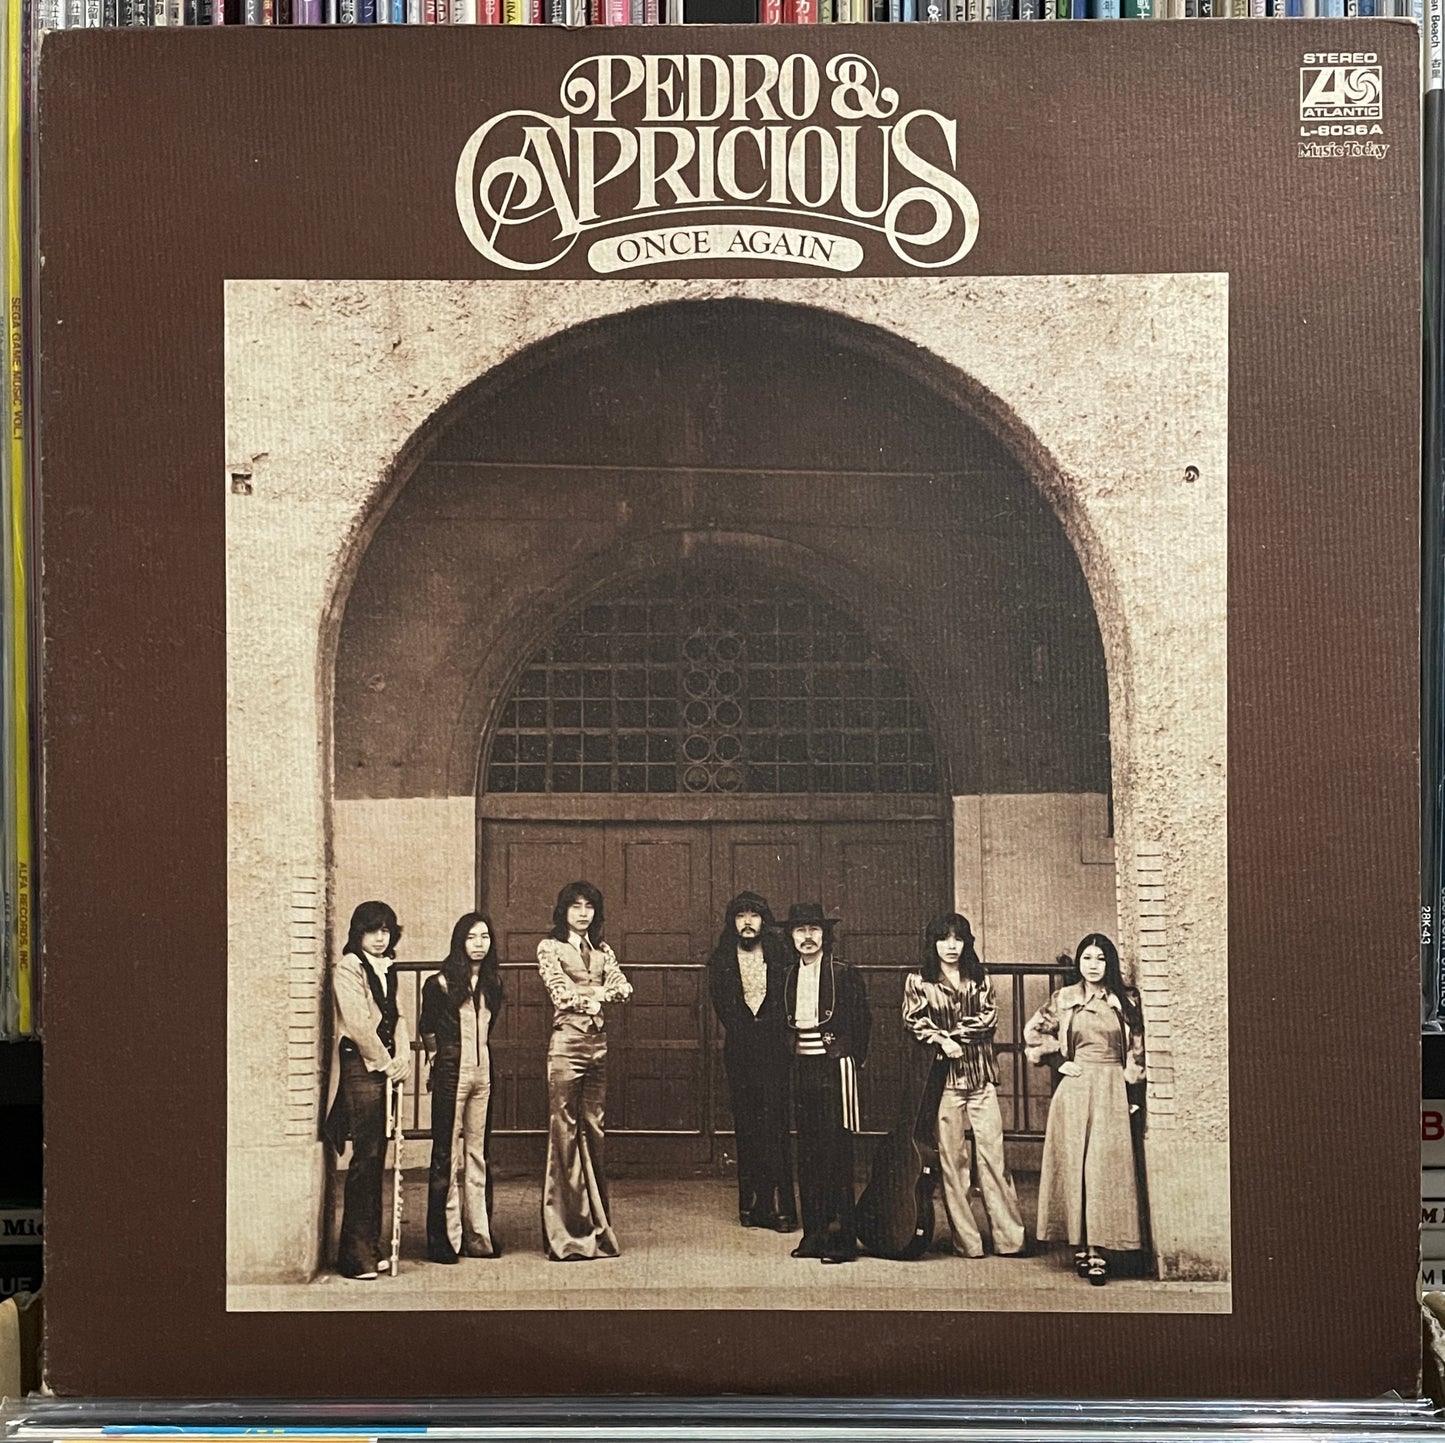 Pedro & Capricious “Once Again” (1974)